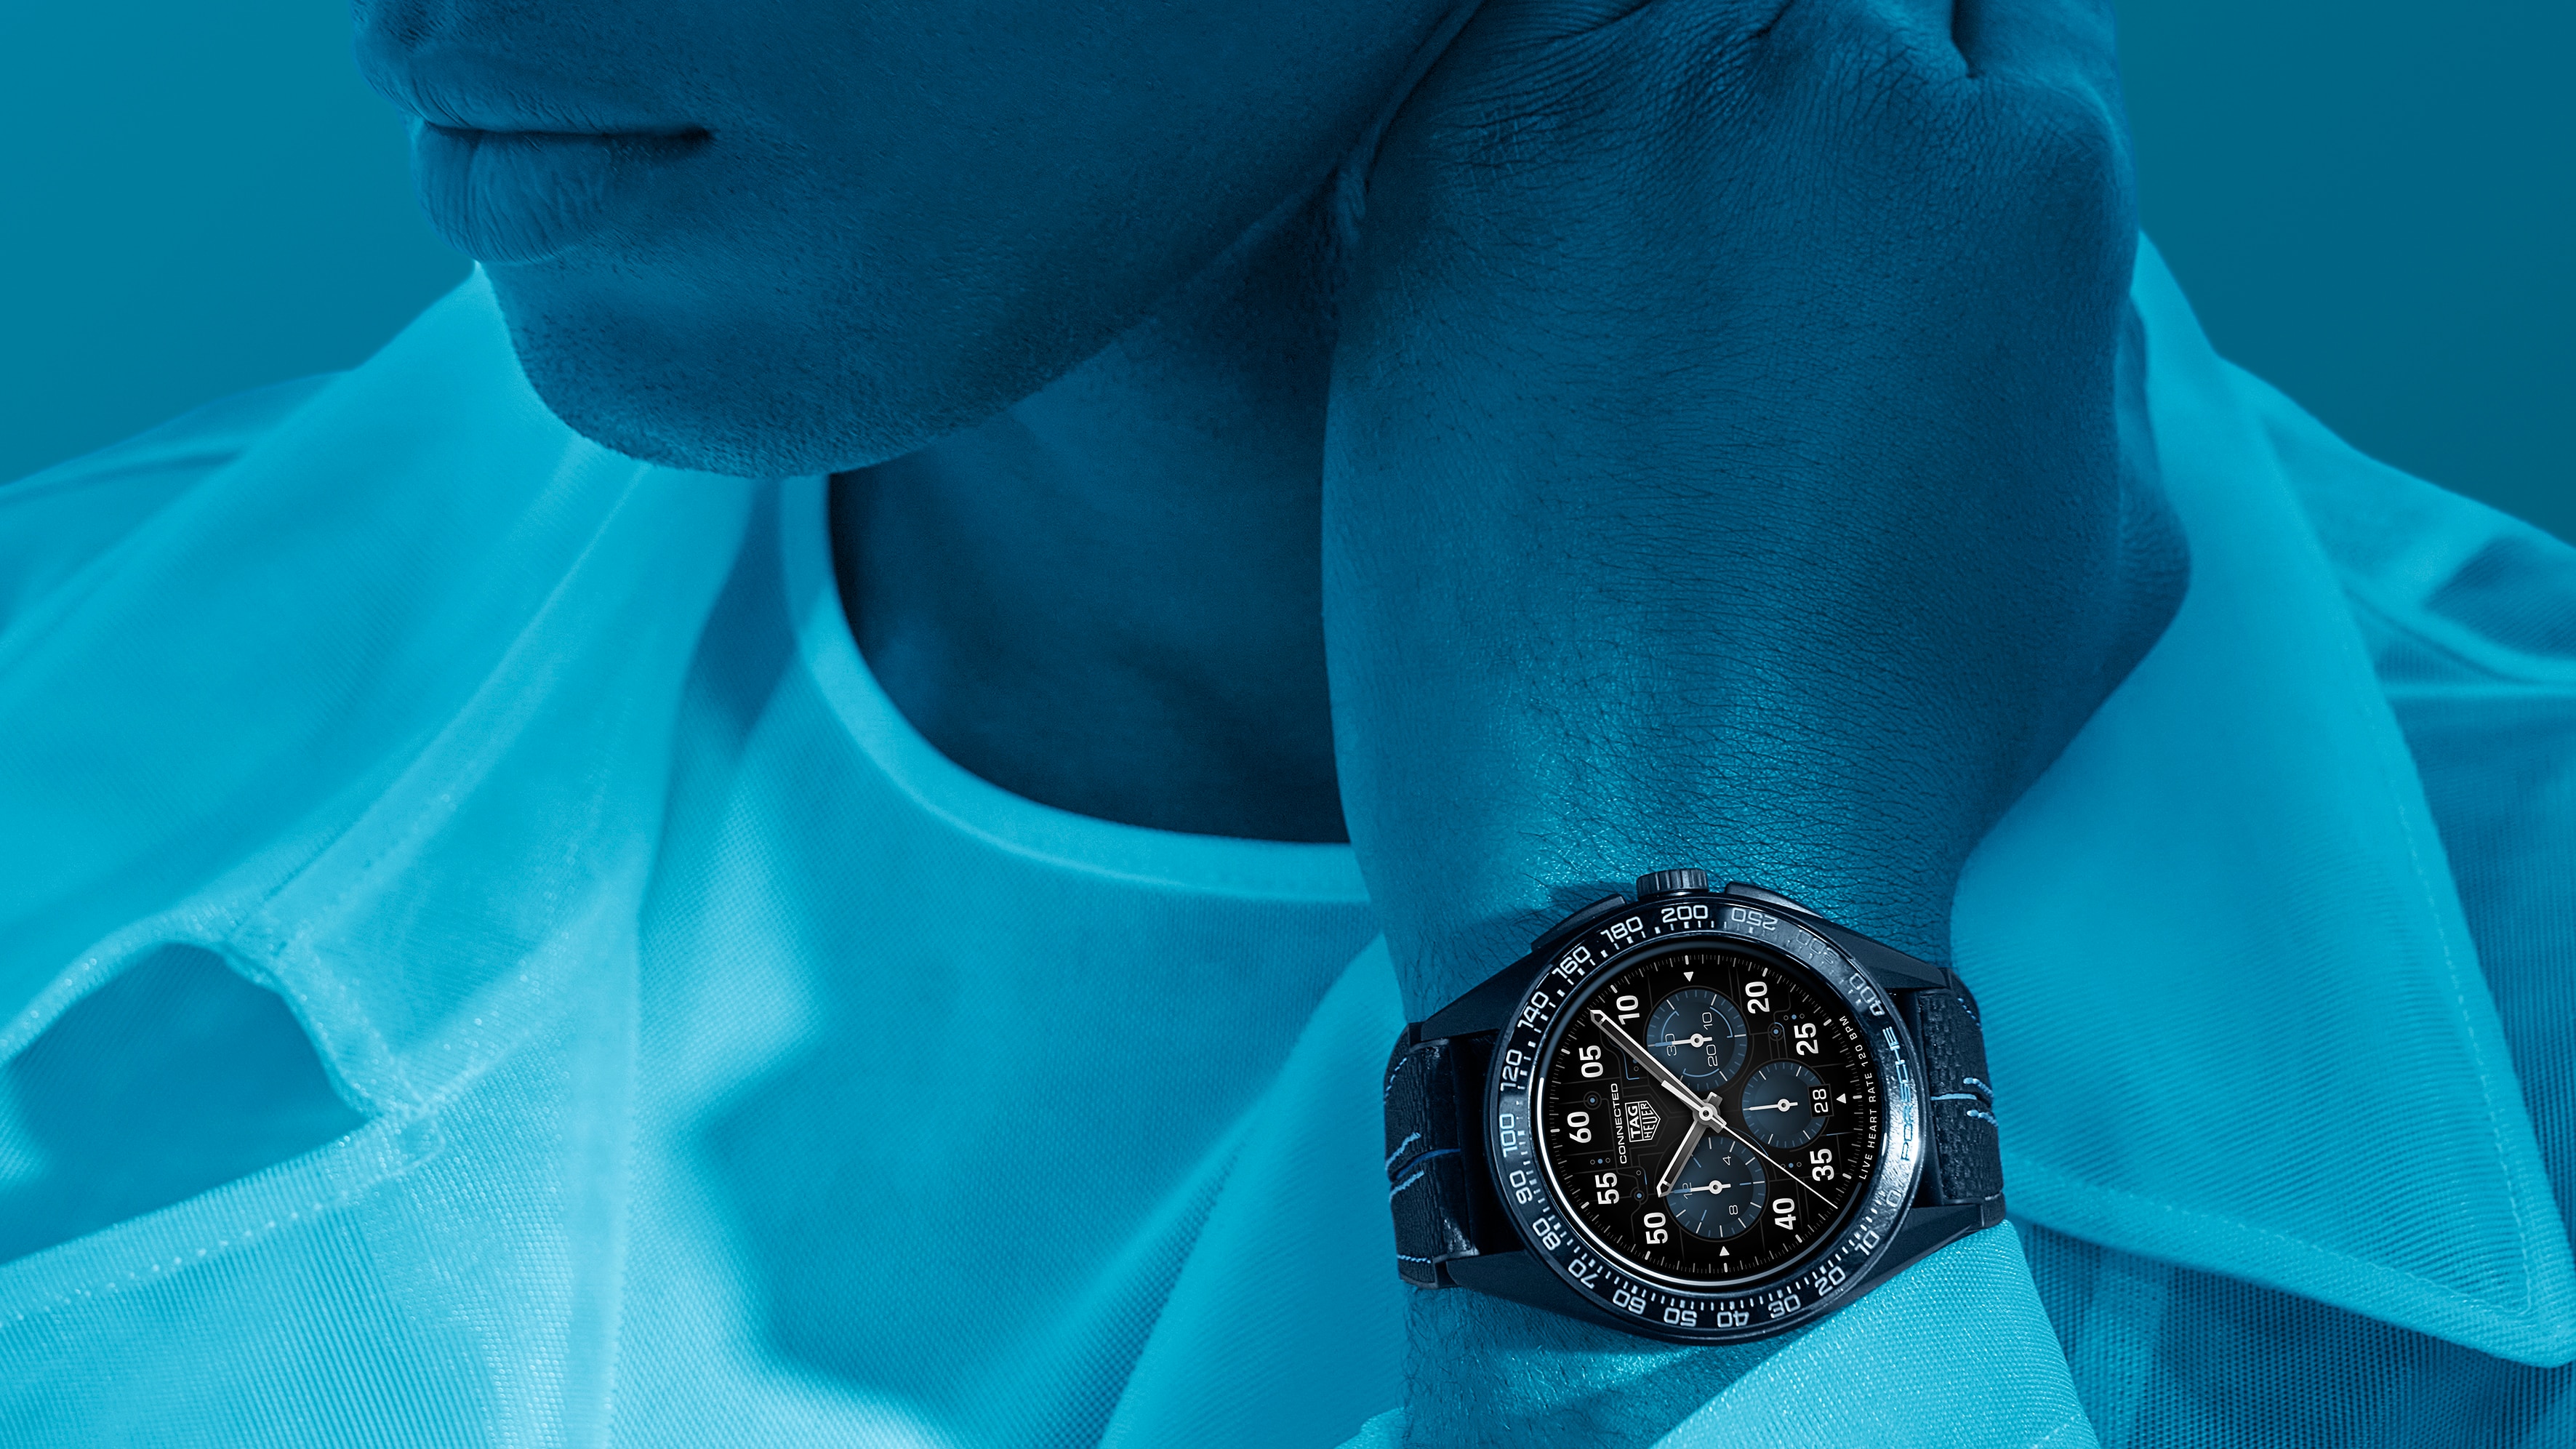 Connect wrist to your ride: The new TAG Heuer Connected Calibre - Porsche Edition | Official Magazine